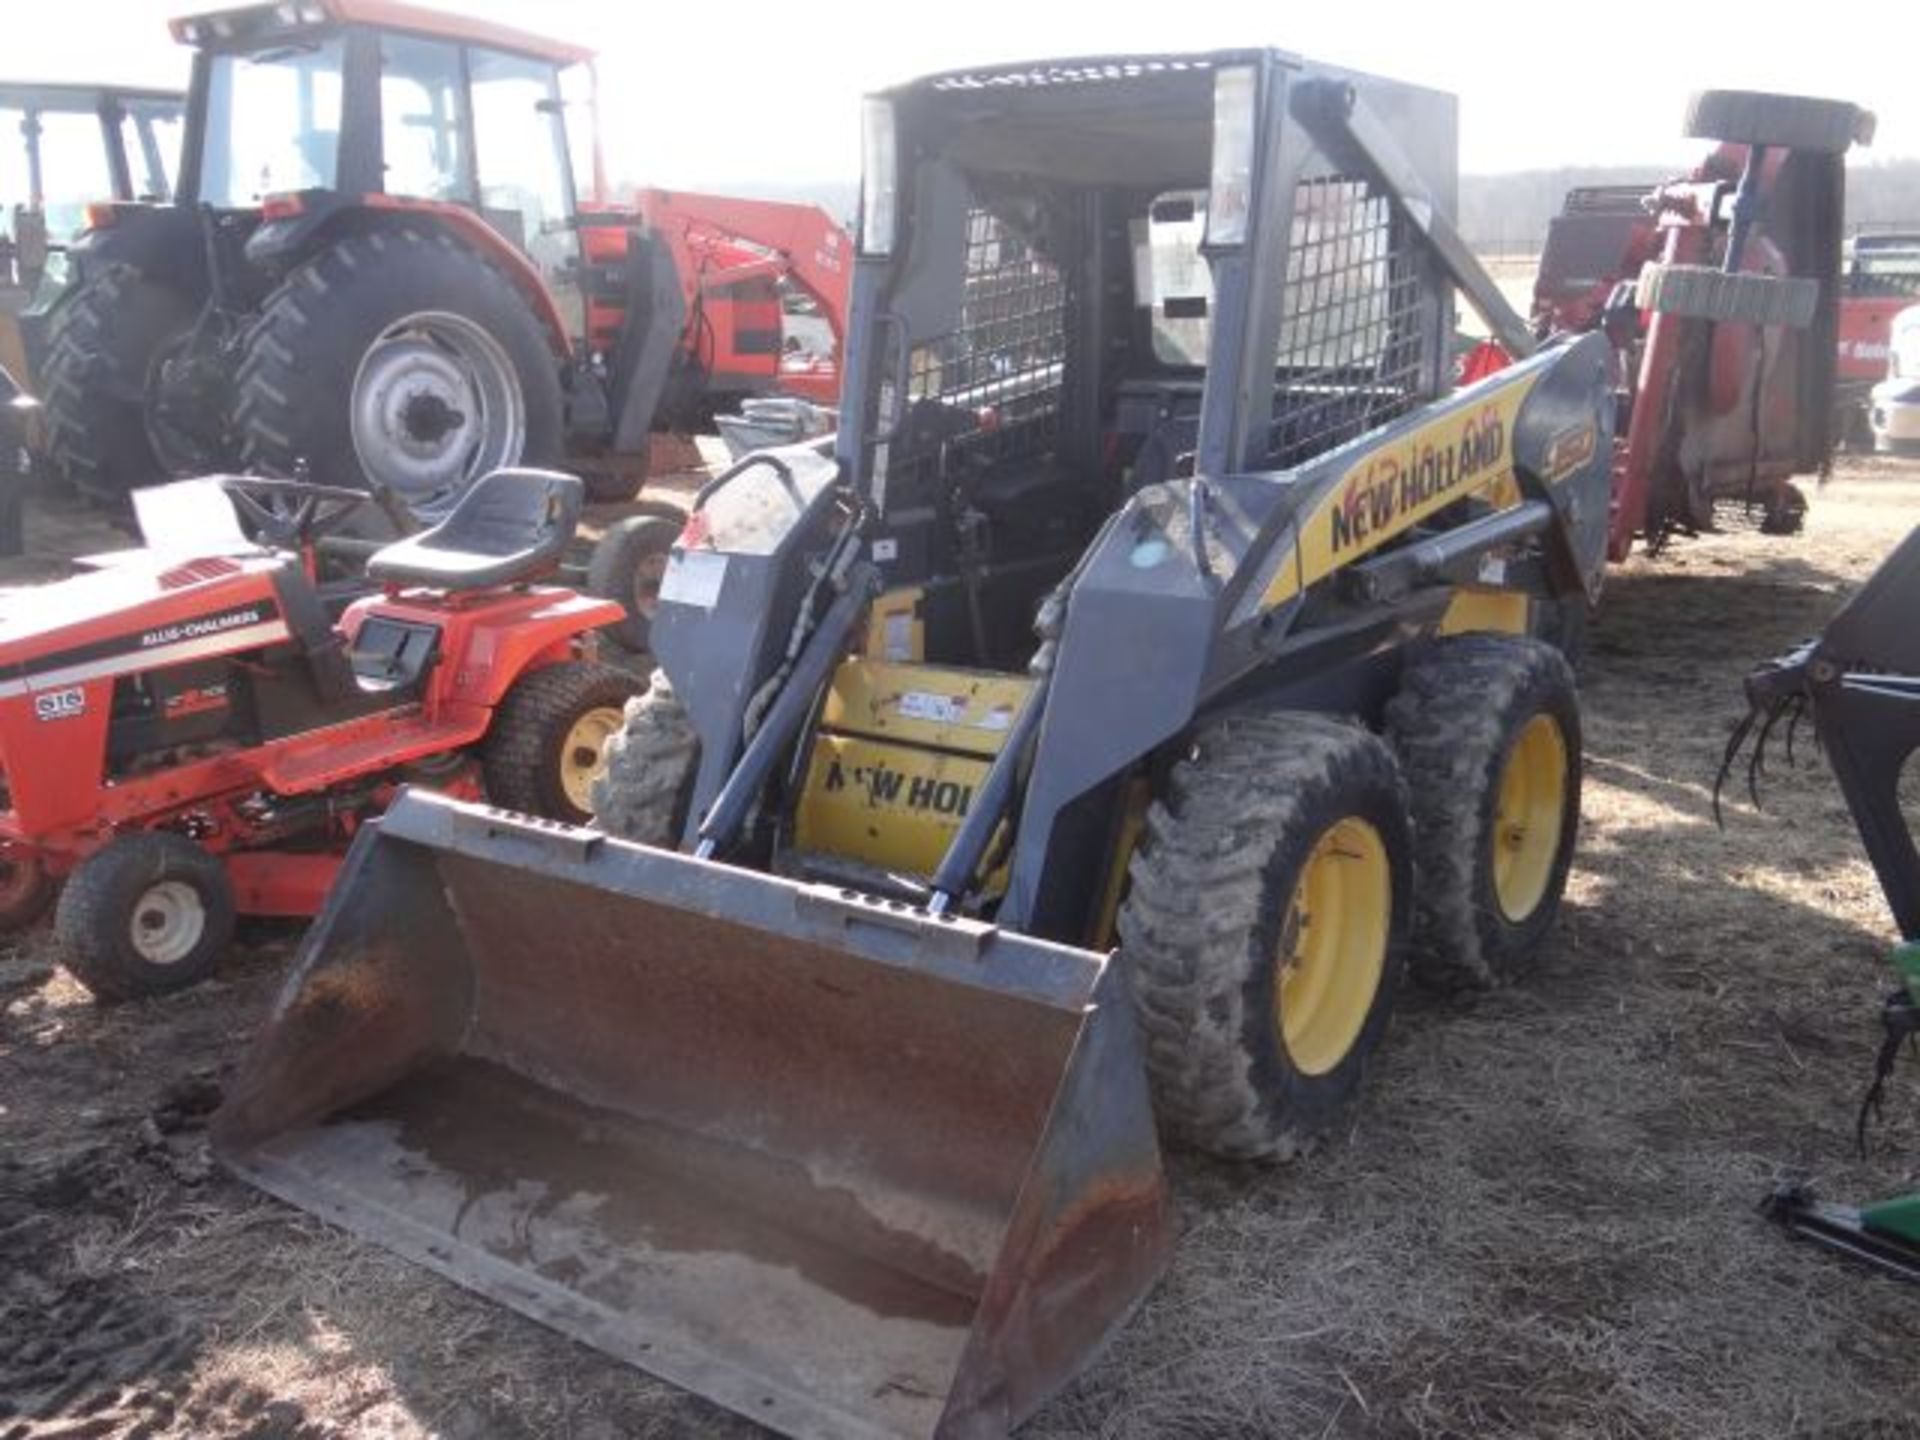 NH L150 Skid Loader, 2008 200 hrs, All New Oil & Filters, Excellent Condition, Aux Hyd, Good Tires - Image 4 of 5